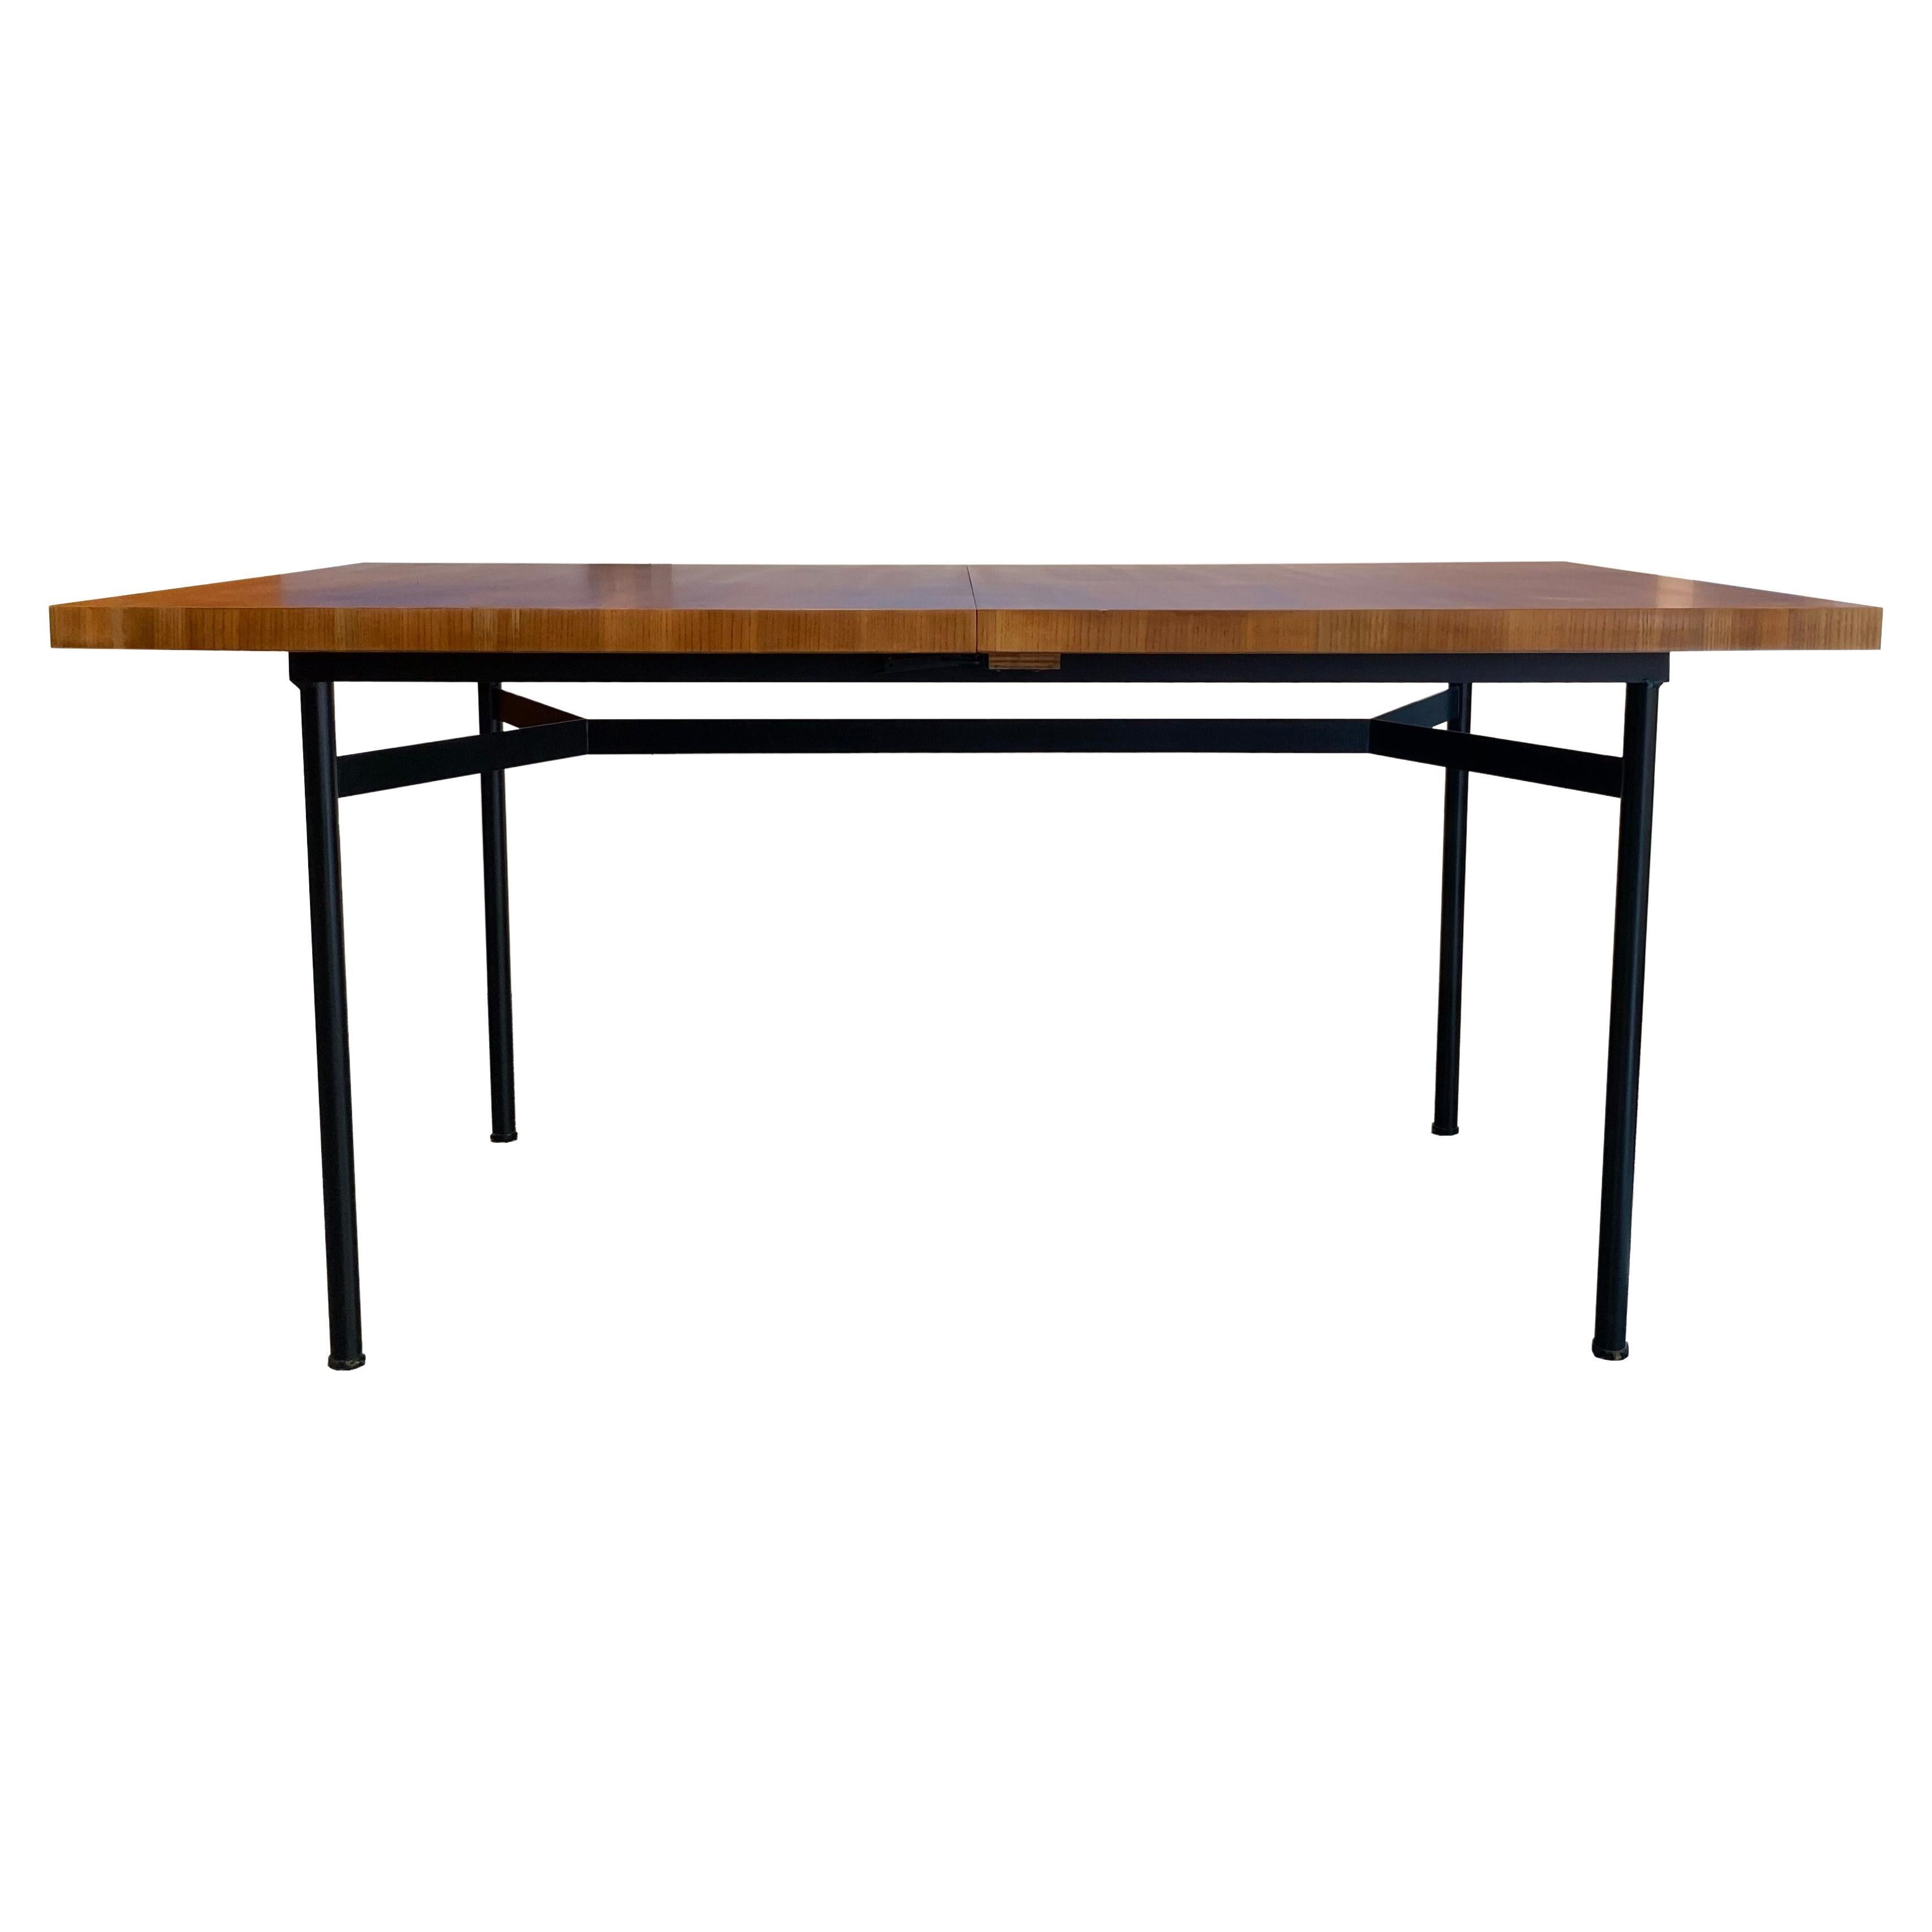 Dining Room Table "Monaco" by Gérard Guermonprez, Signed Magnani Edition, 1960 For Sale